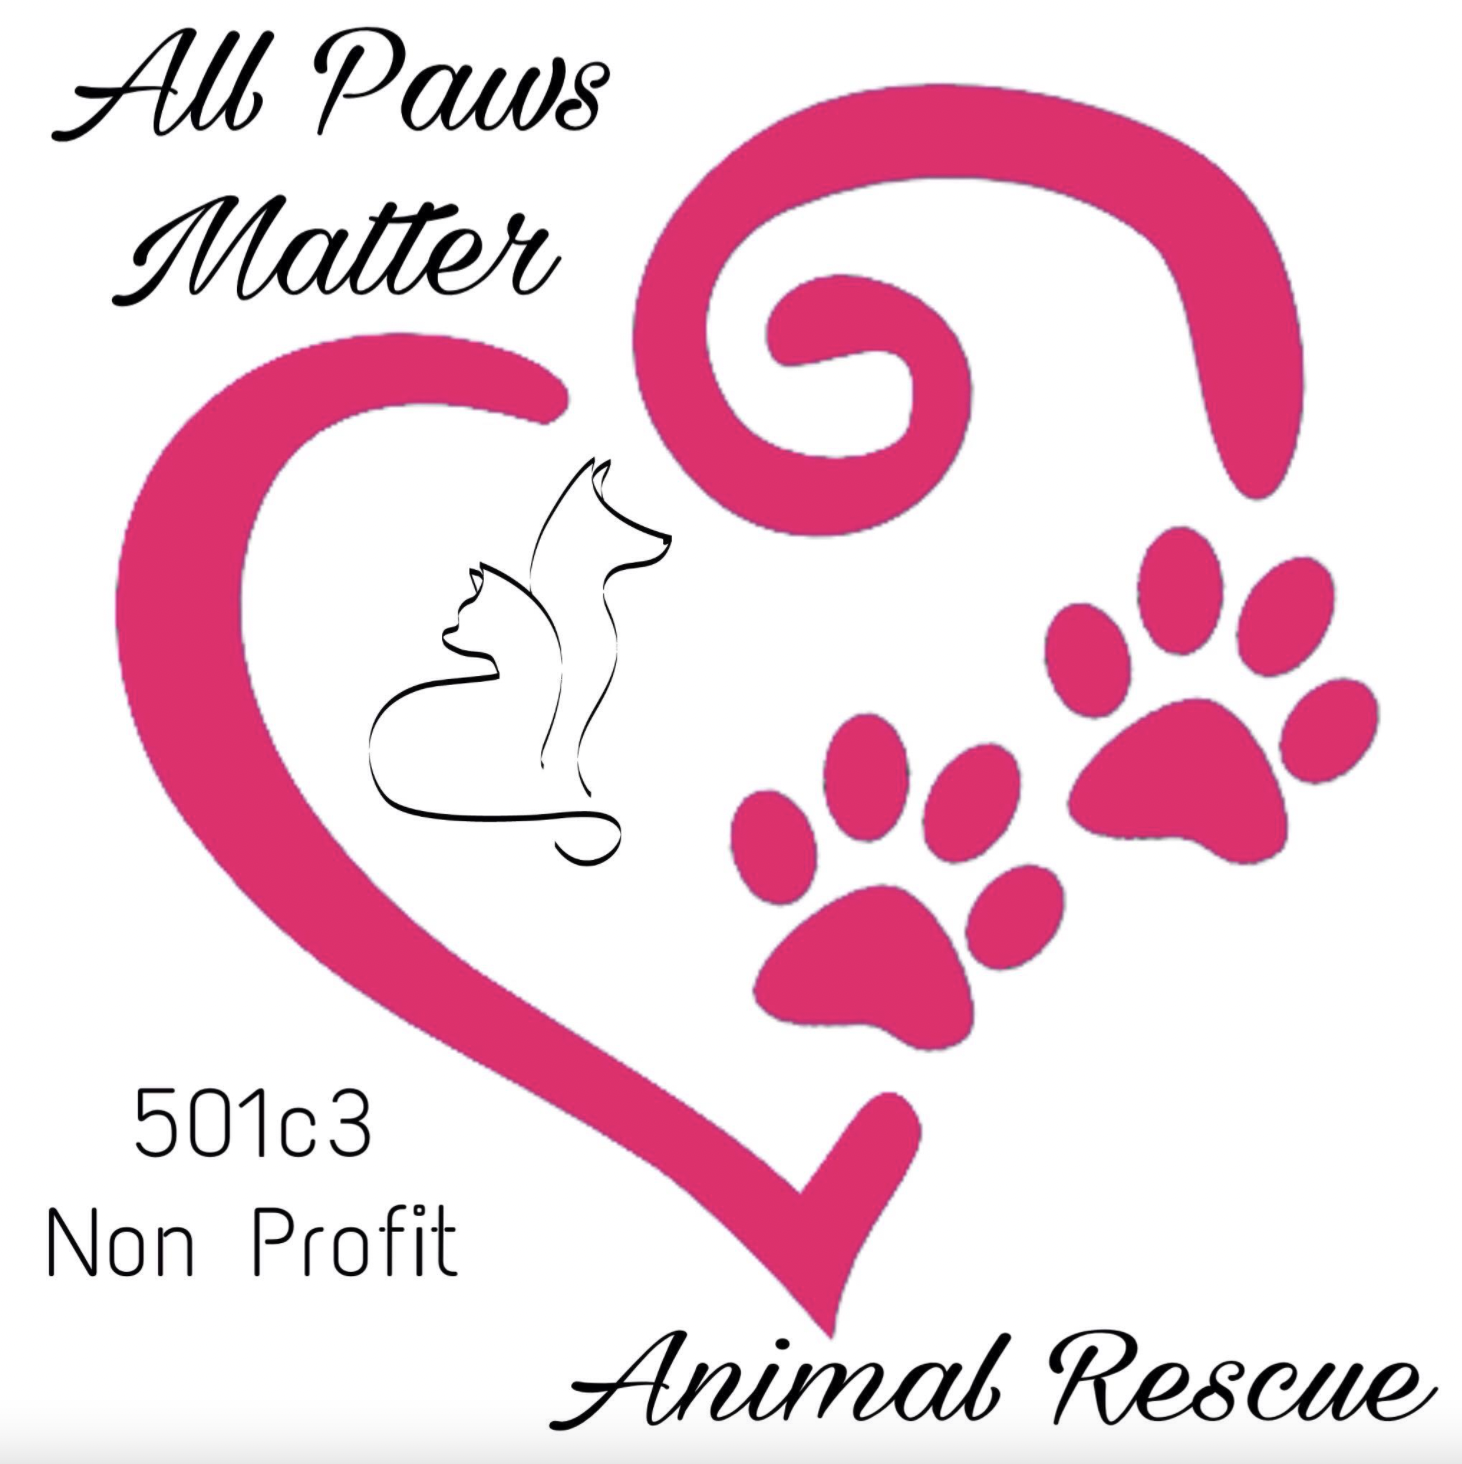 All Paws Matter Animal Rescue 